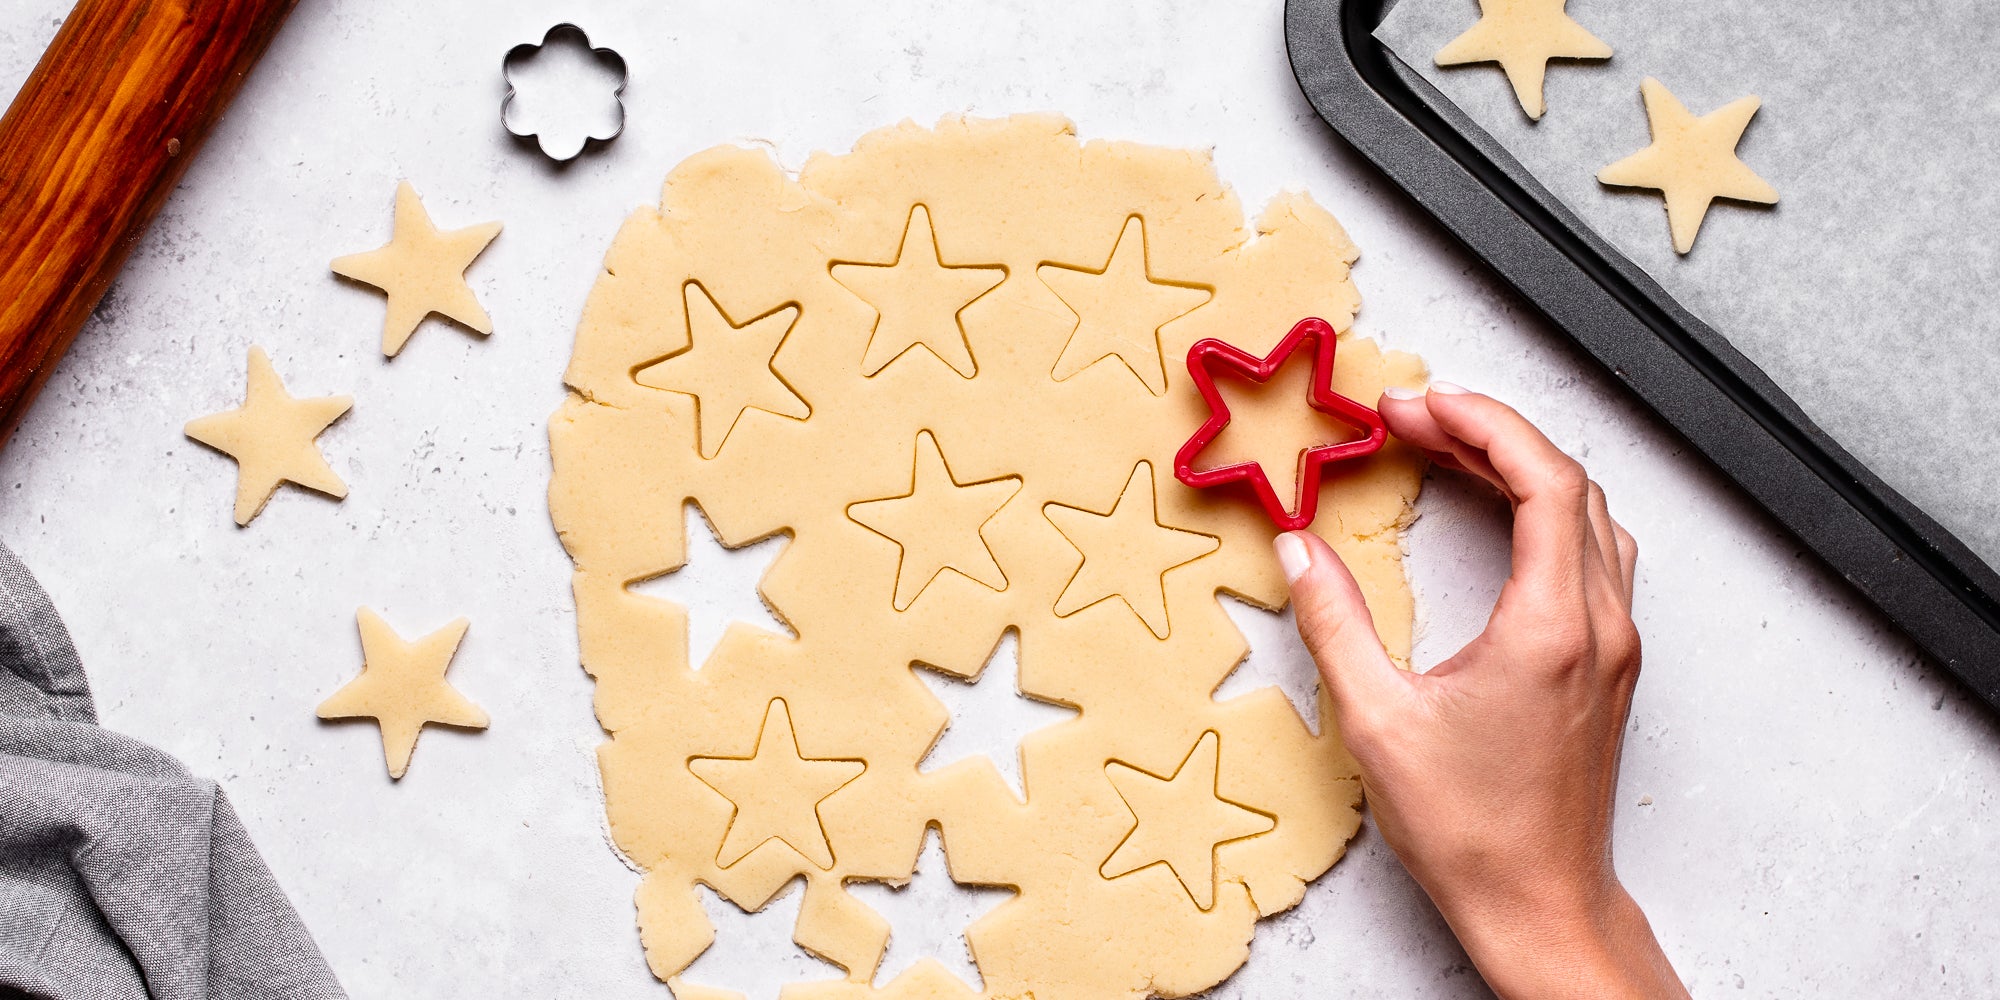 Top down view of a hand using a cookie cutter to cut out a star in vegan biscuit dough